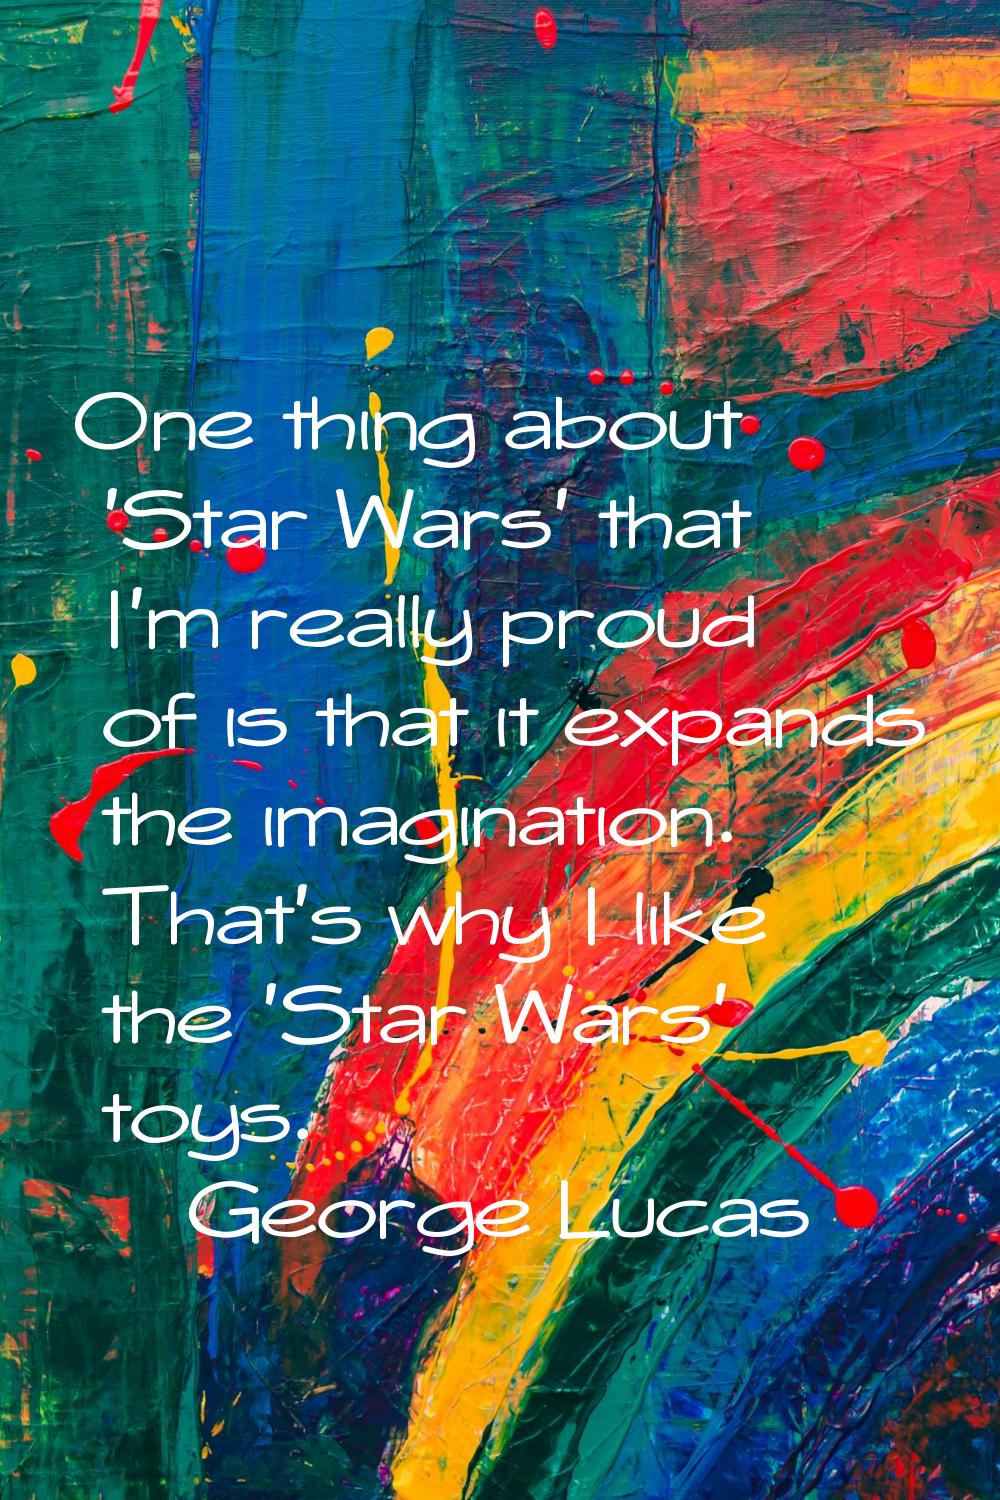 One thing about 'Star Wars' that I'm really proud of is that it expands the imagination. That's why